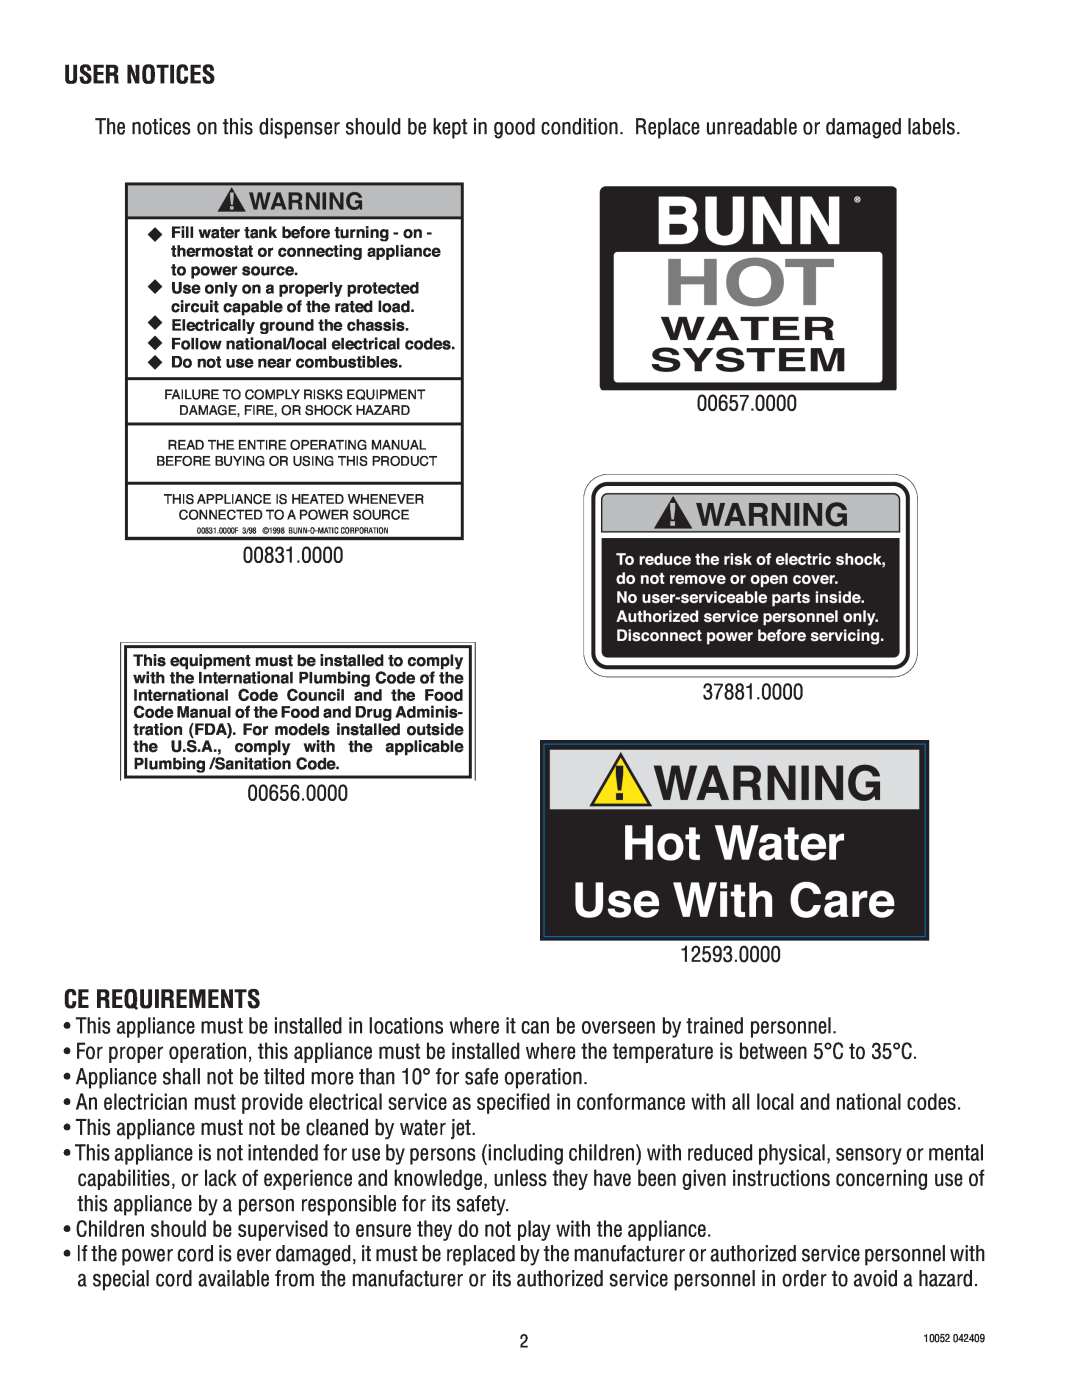 Bunn HW2A warranty User Notices, Ce Requirements 